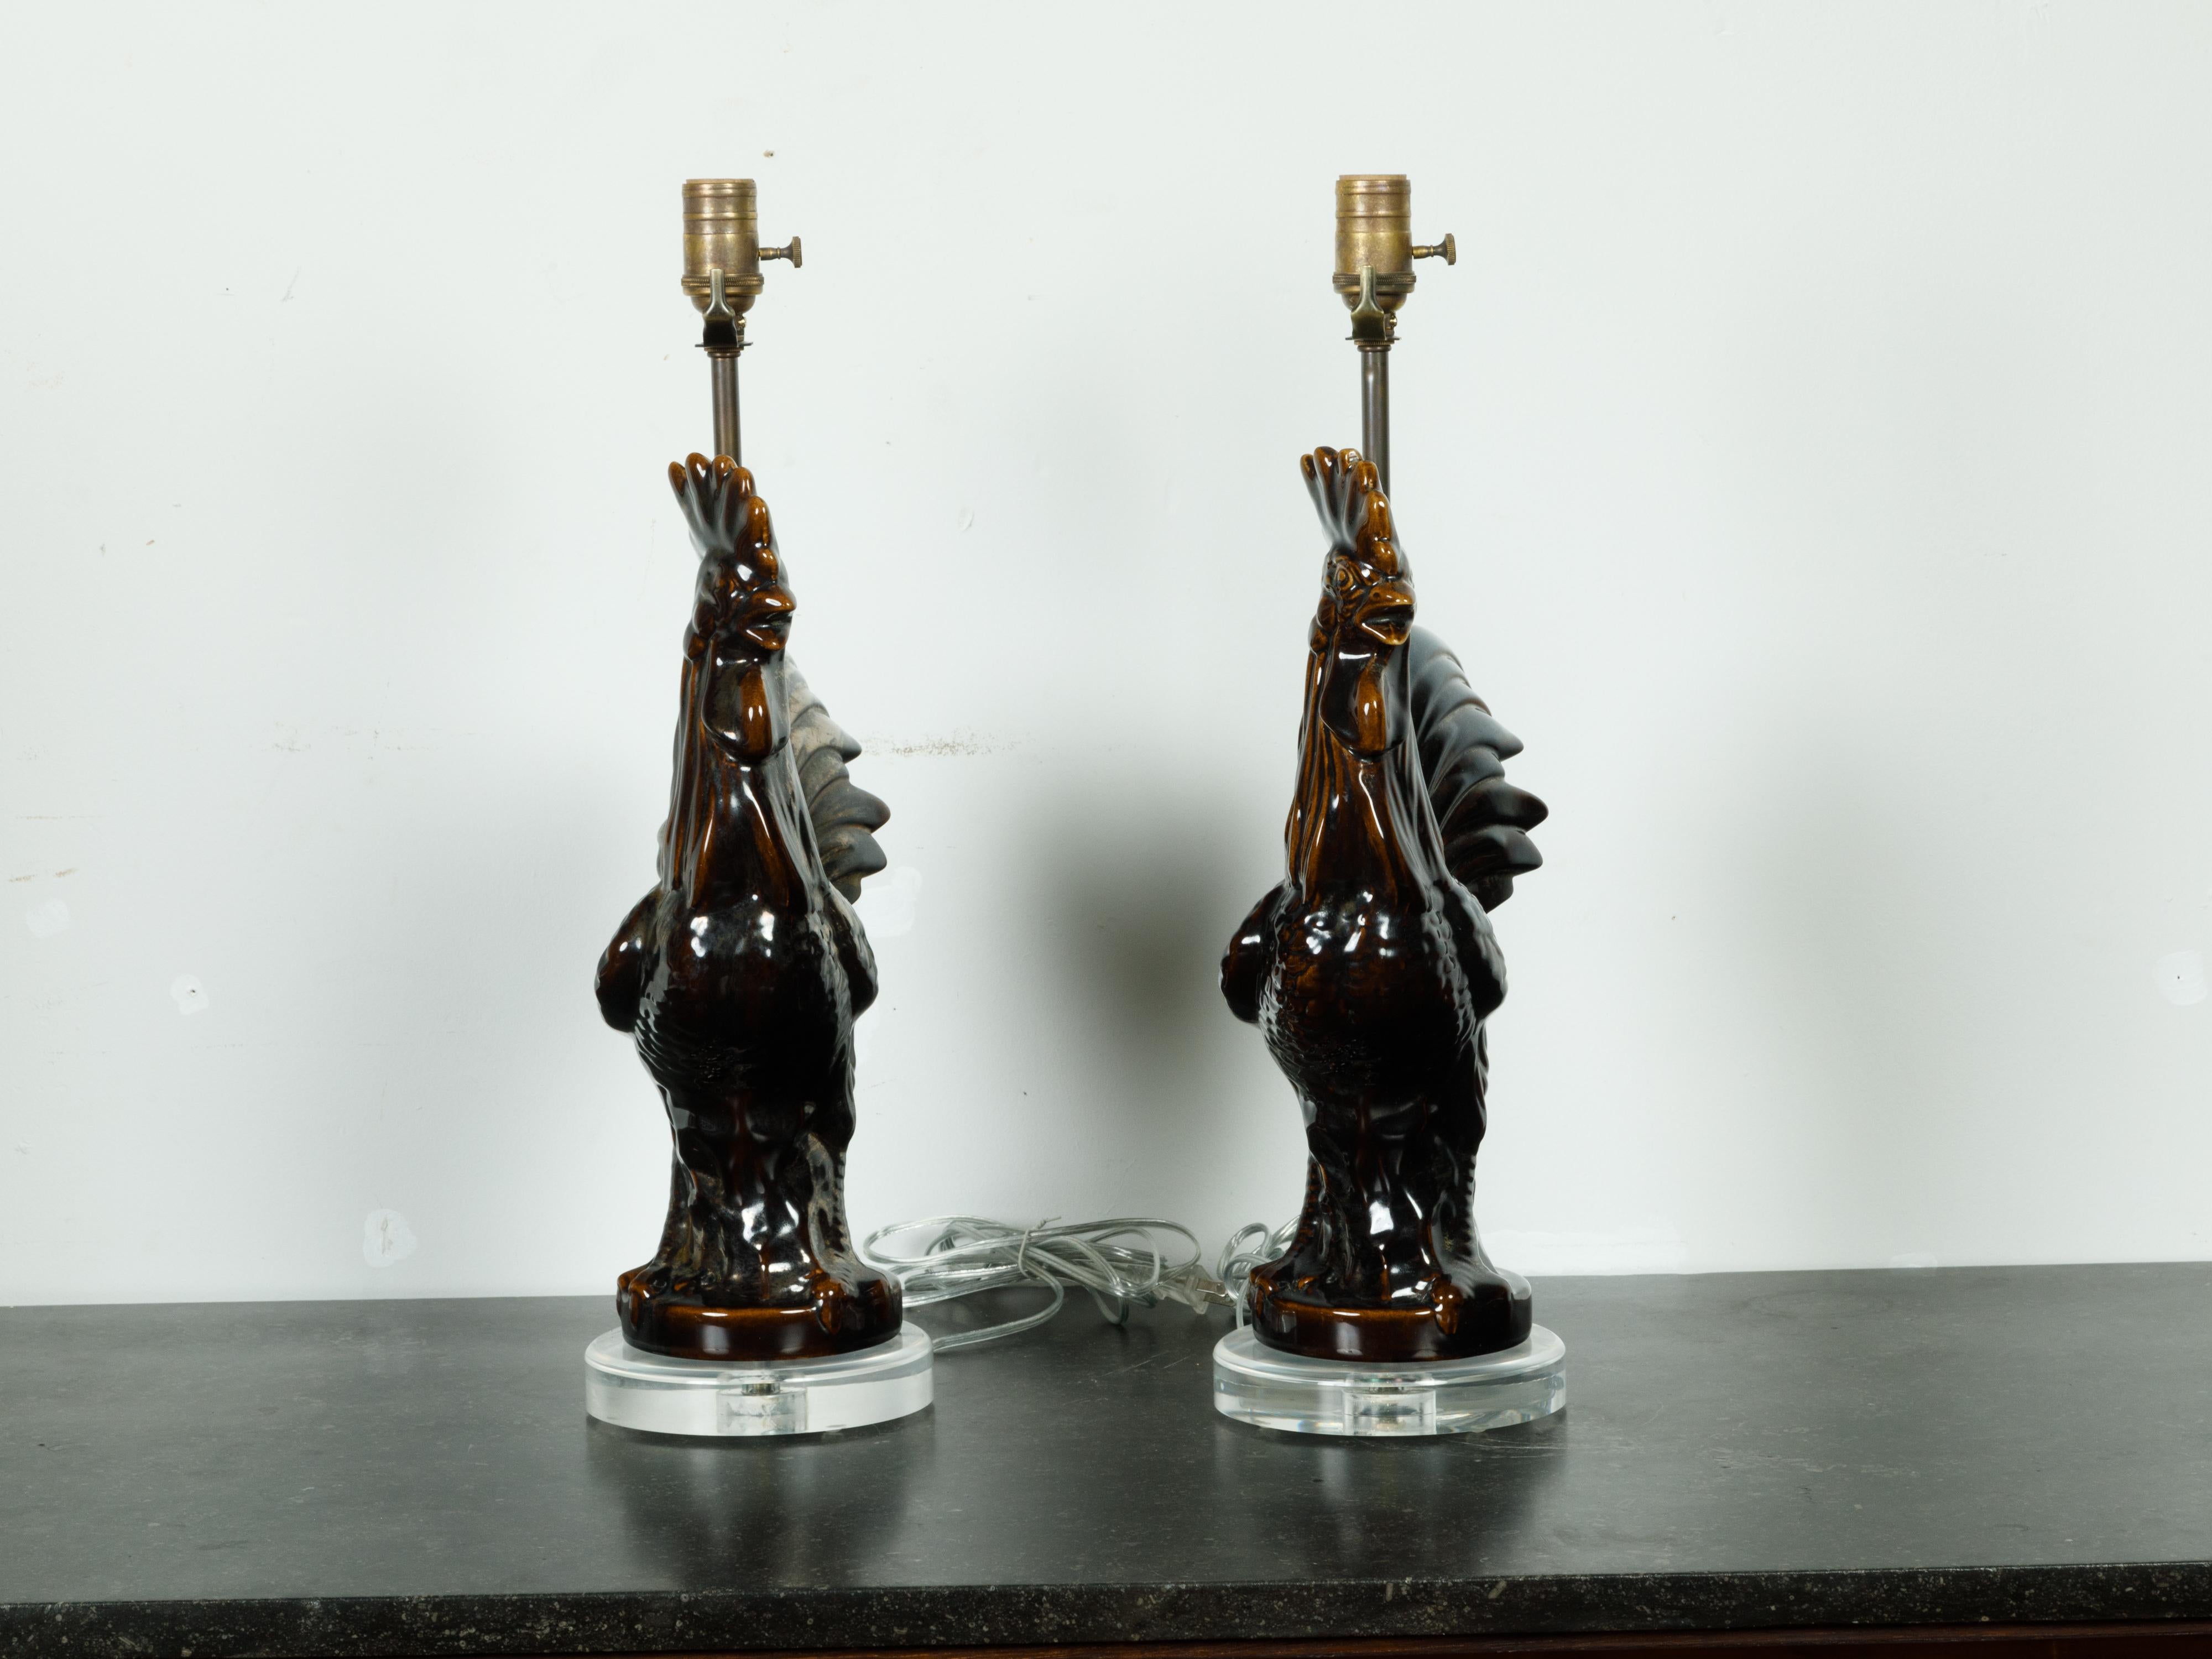 Two French pottery rooster table lamps from the mid 20th century, with dark patina and lucite bases, priced and sold individually $1,200 each. Created in France during the second quarter of the 20th century, each table lamp draws our attention with